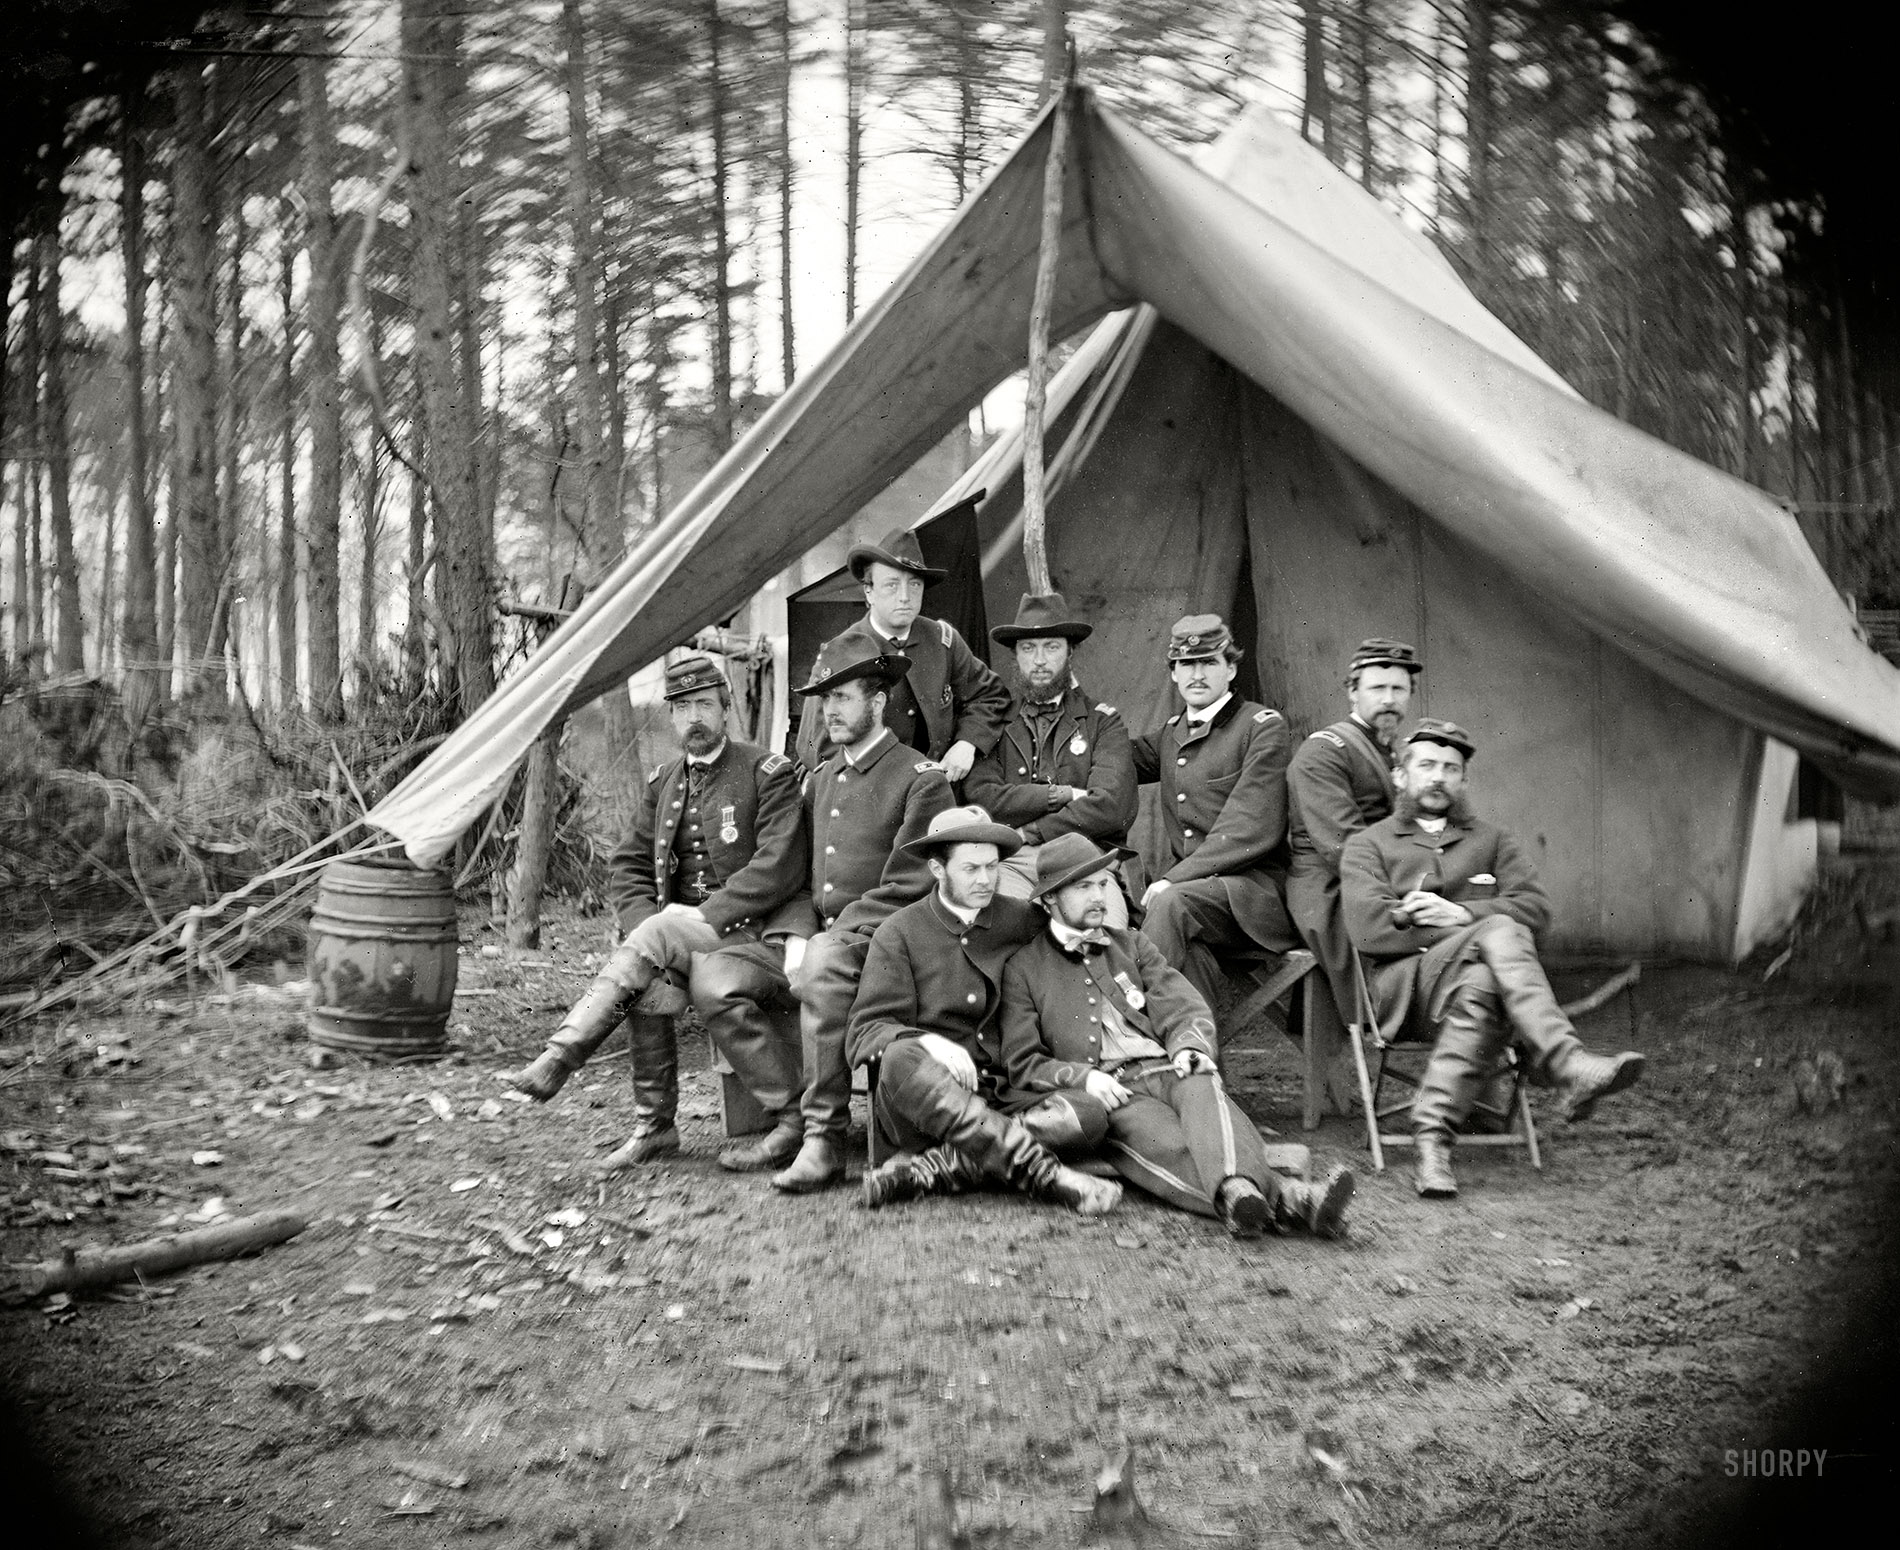 April 1864. "Brandy Station, Virginia. Major William Riddle and friends. Headquarters, Army of the Potomac." Wet plate negative by Timothy H. O'Sullivan. Civil War glass plate collection, Library of Congress. View full size.